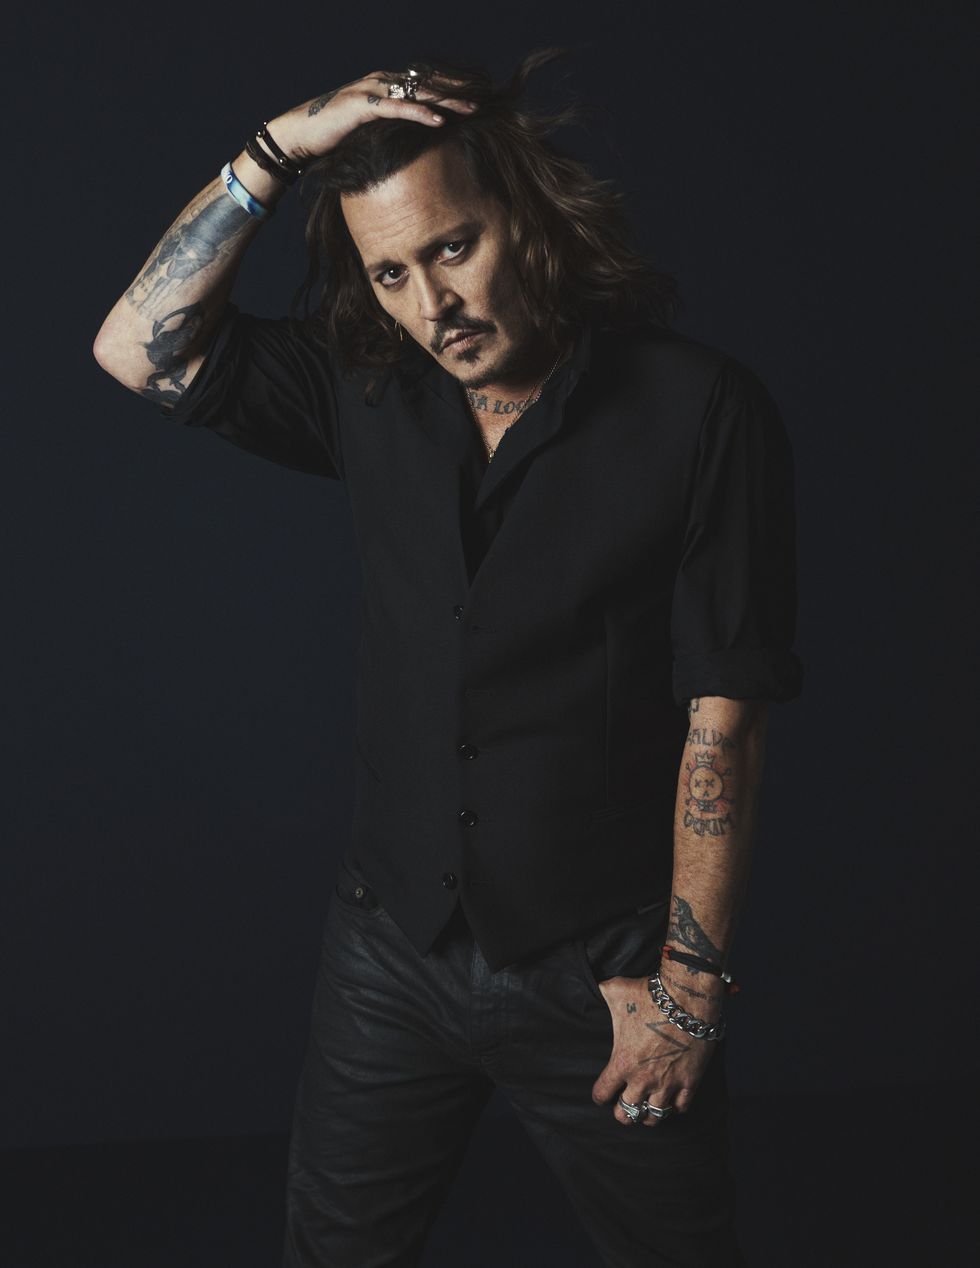 johnny depp with long hair and tattoos